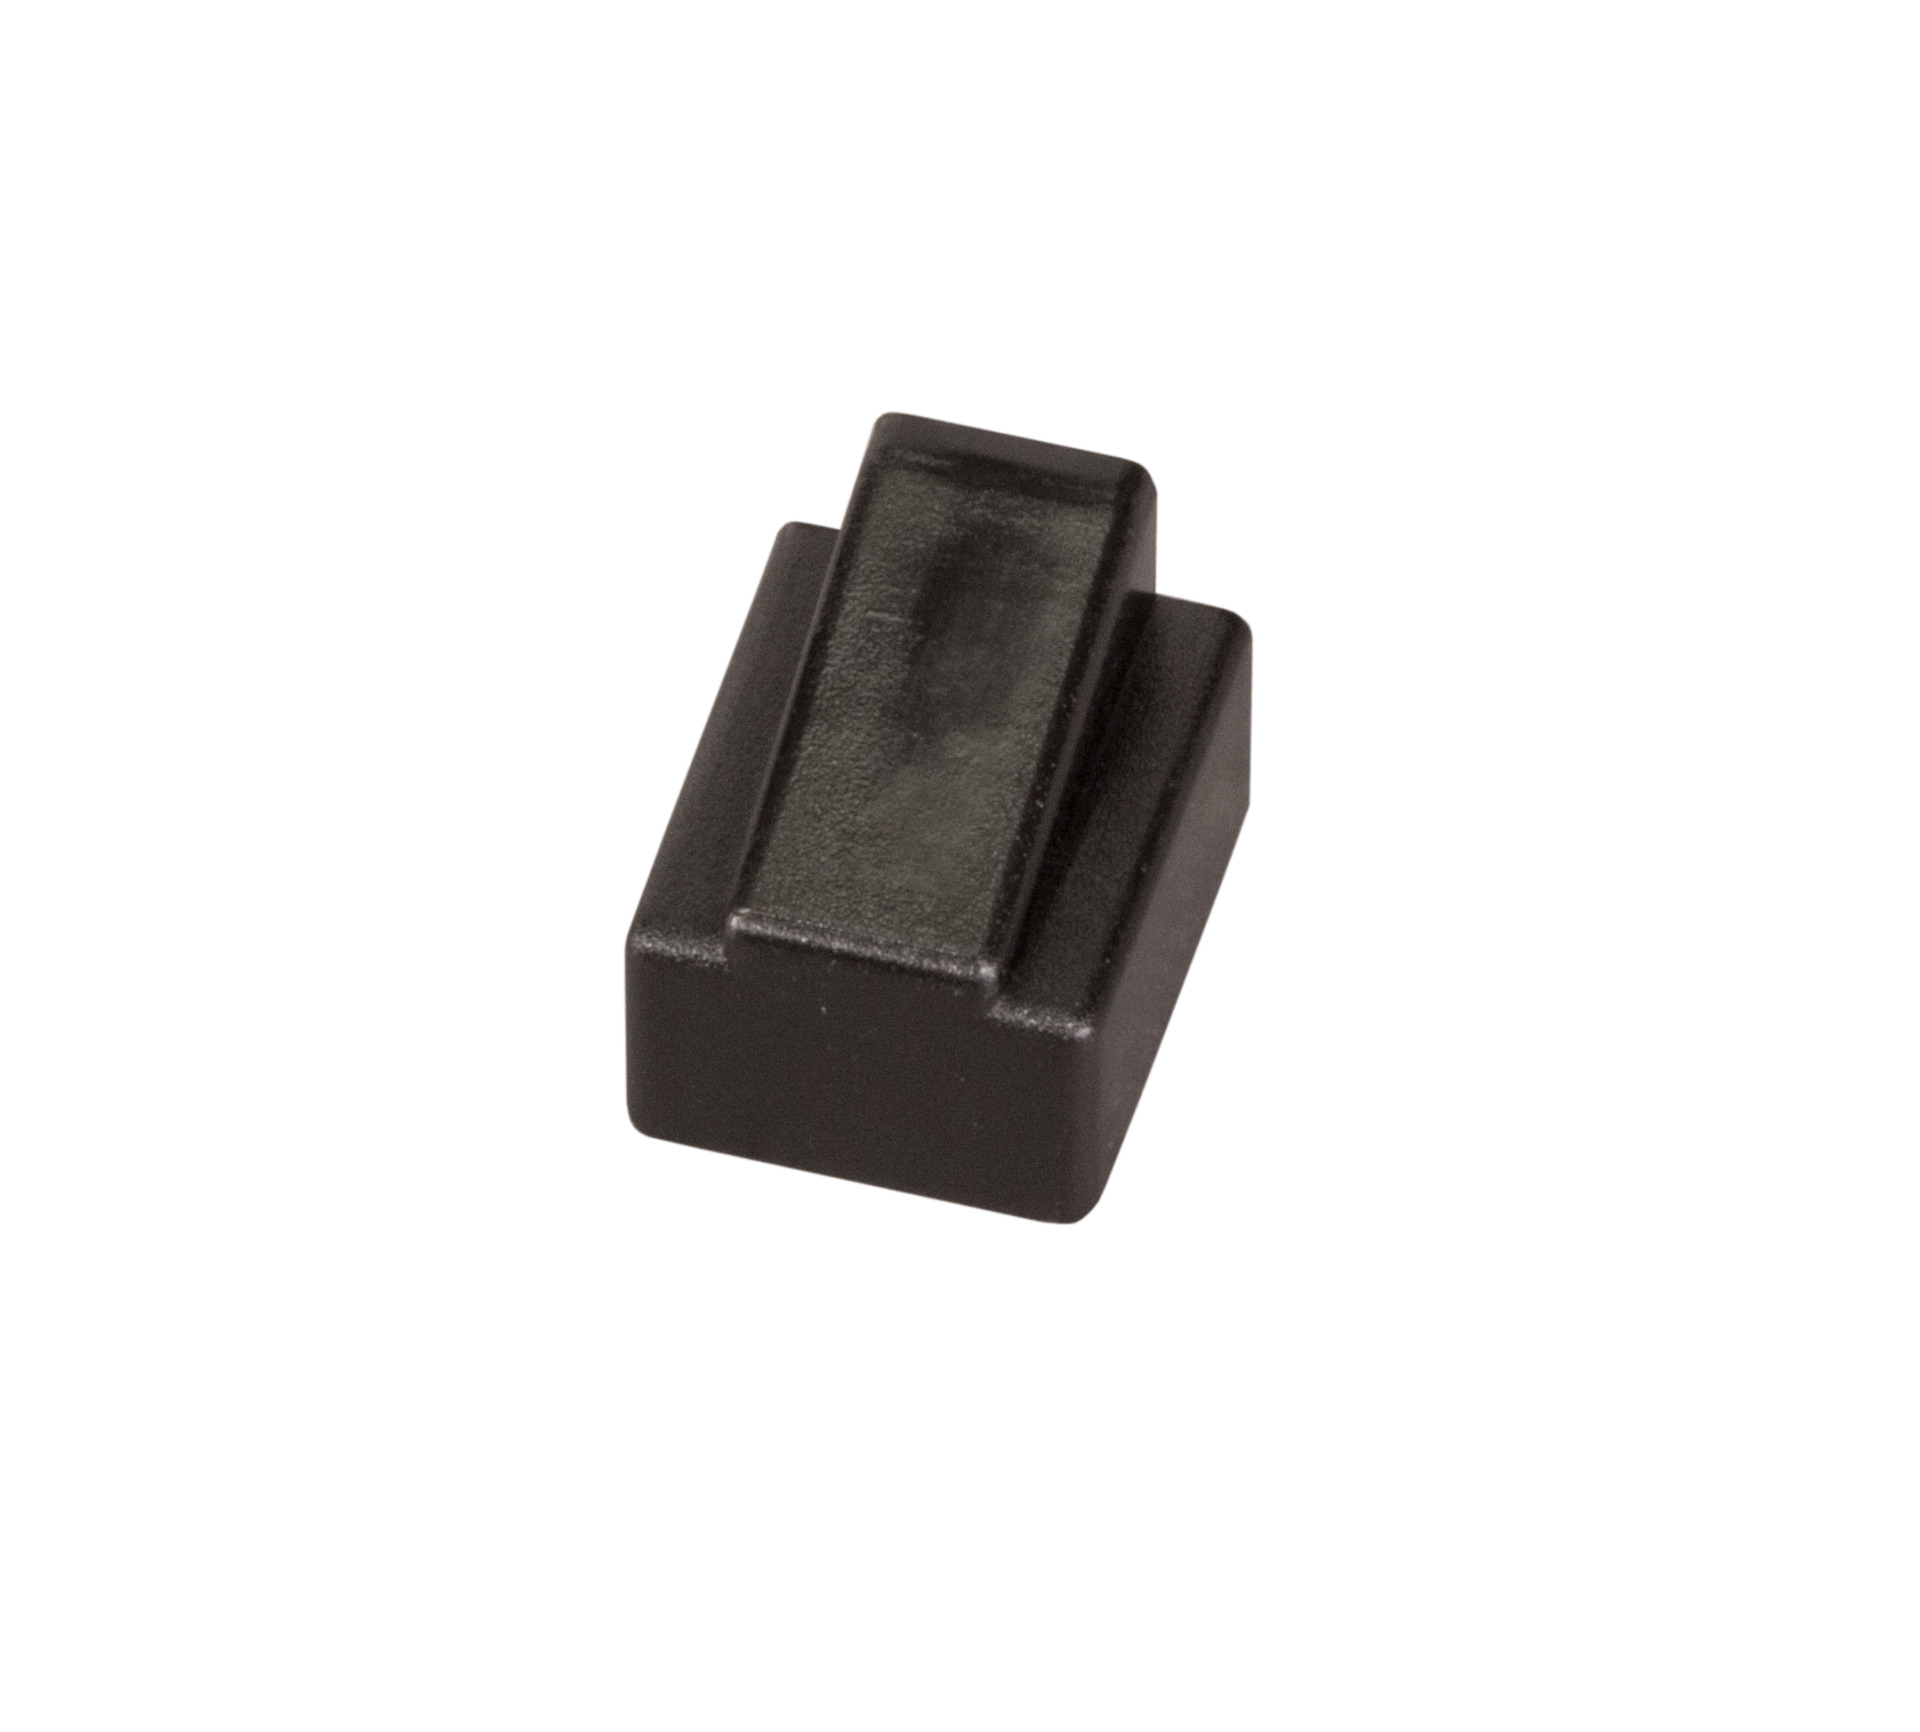 Dust protection cap for RJ45 Connector, black